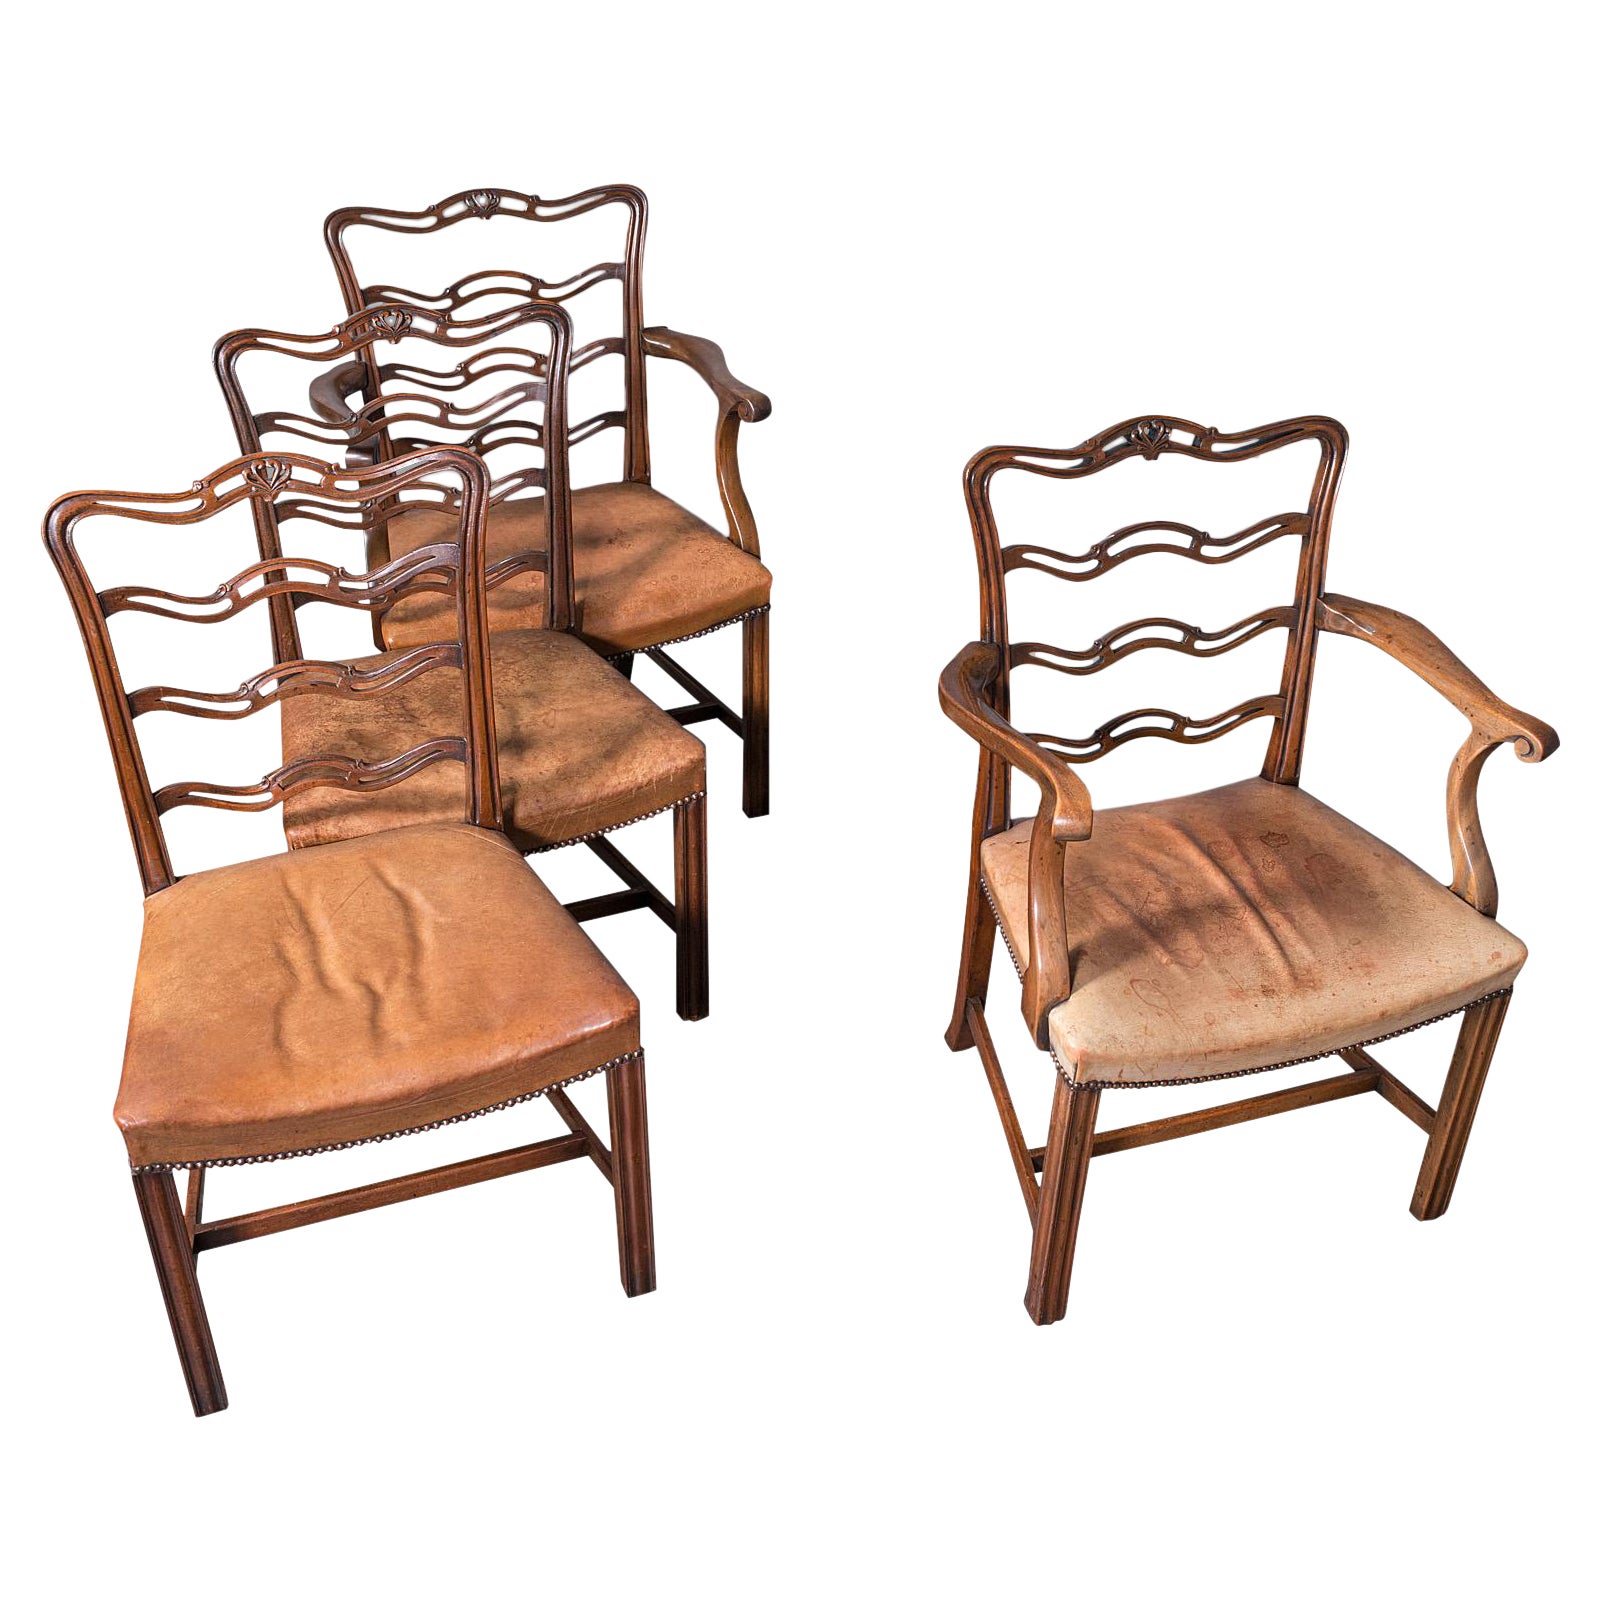 Set of 4 Vintage Ladder Back Chairs, Irish, Carver, Seat, Art Deco, Circa 1940 For Sale